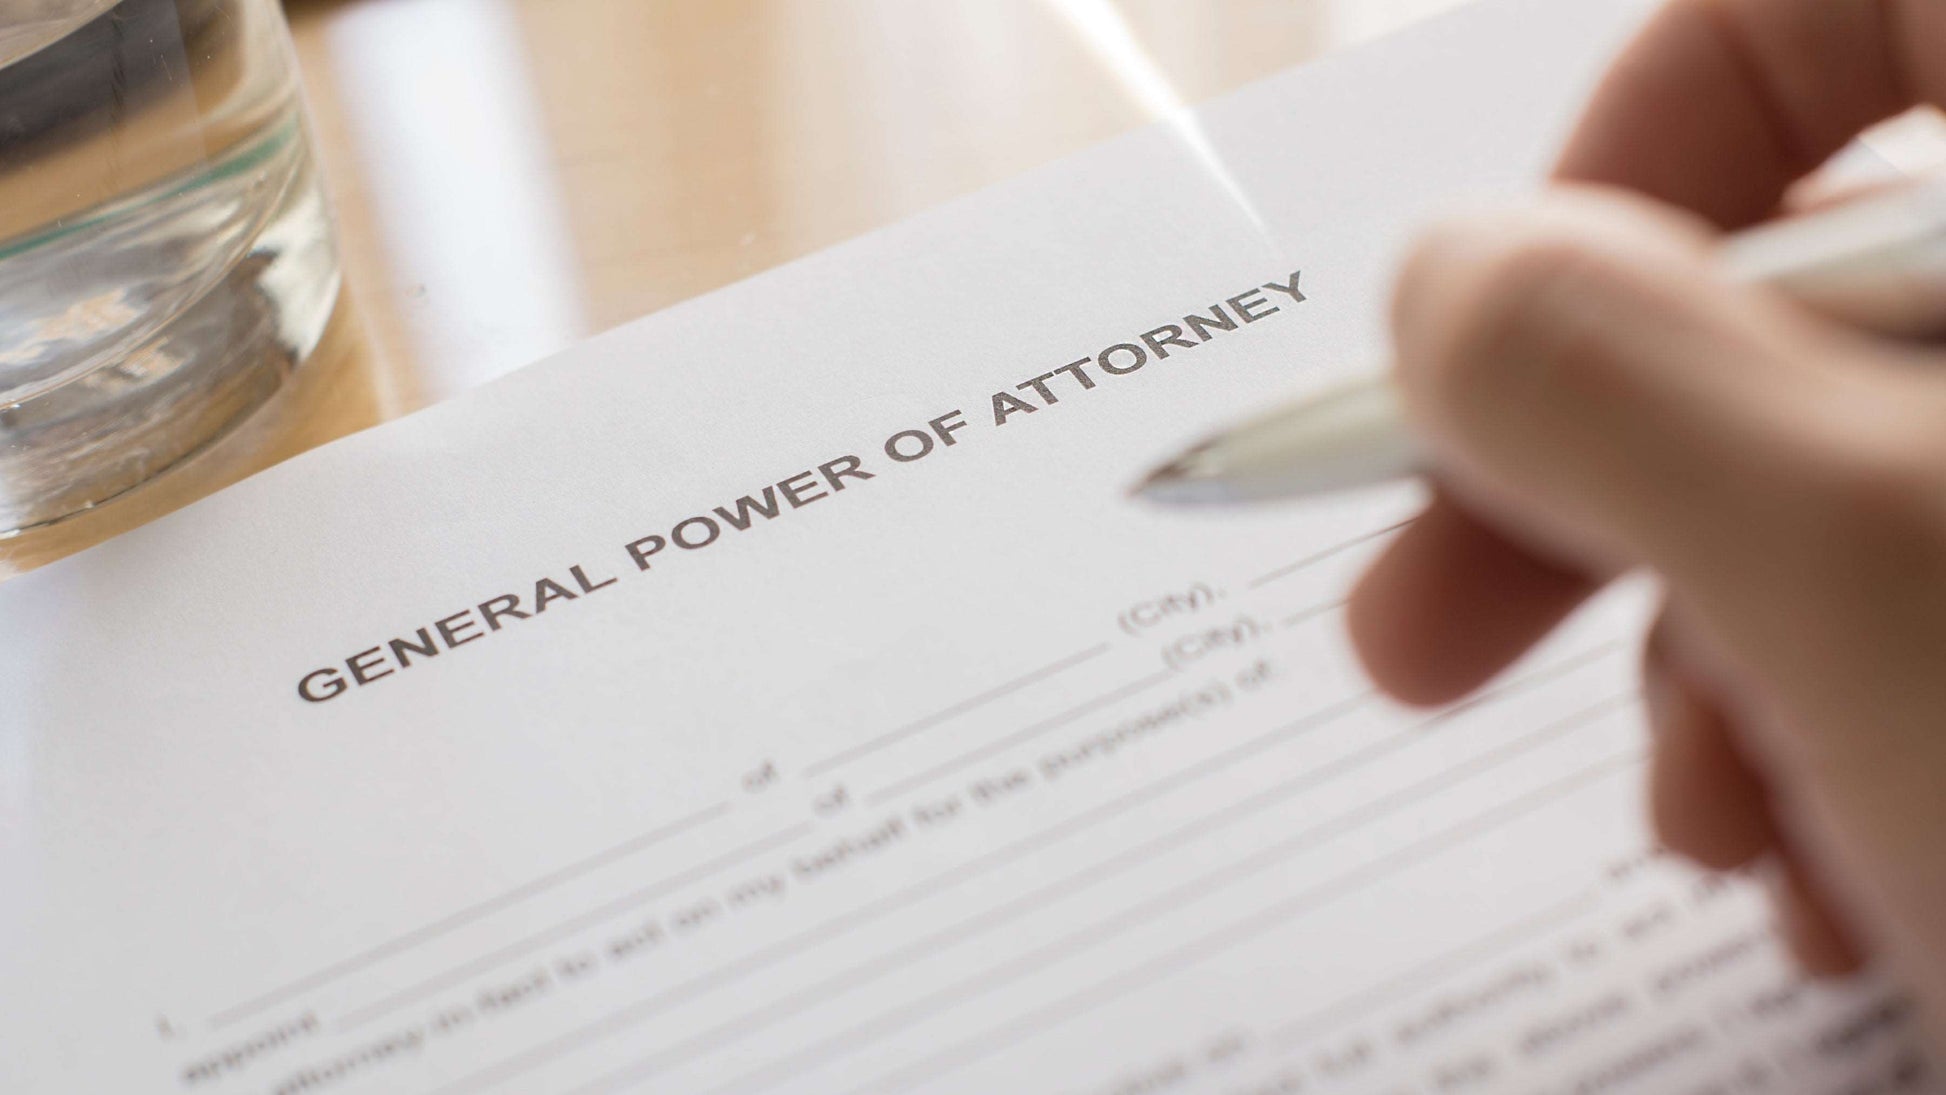 General Power Of Attorney